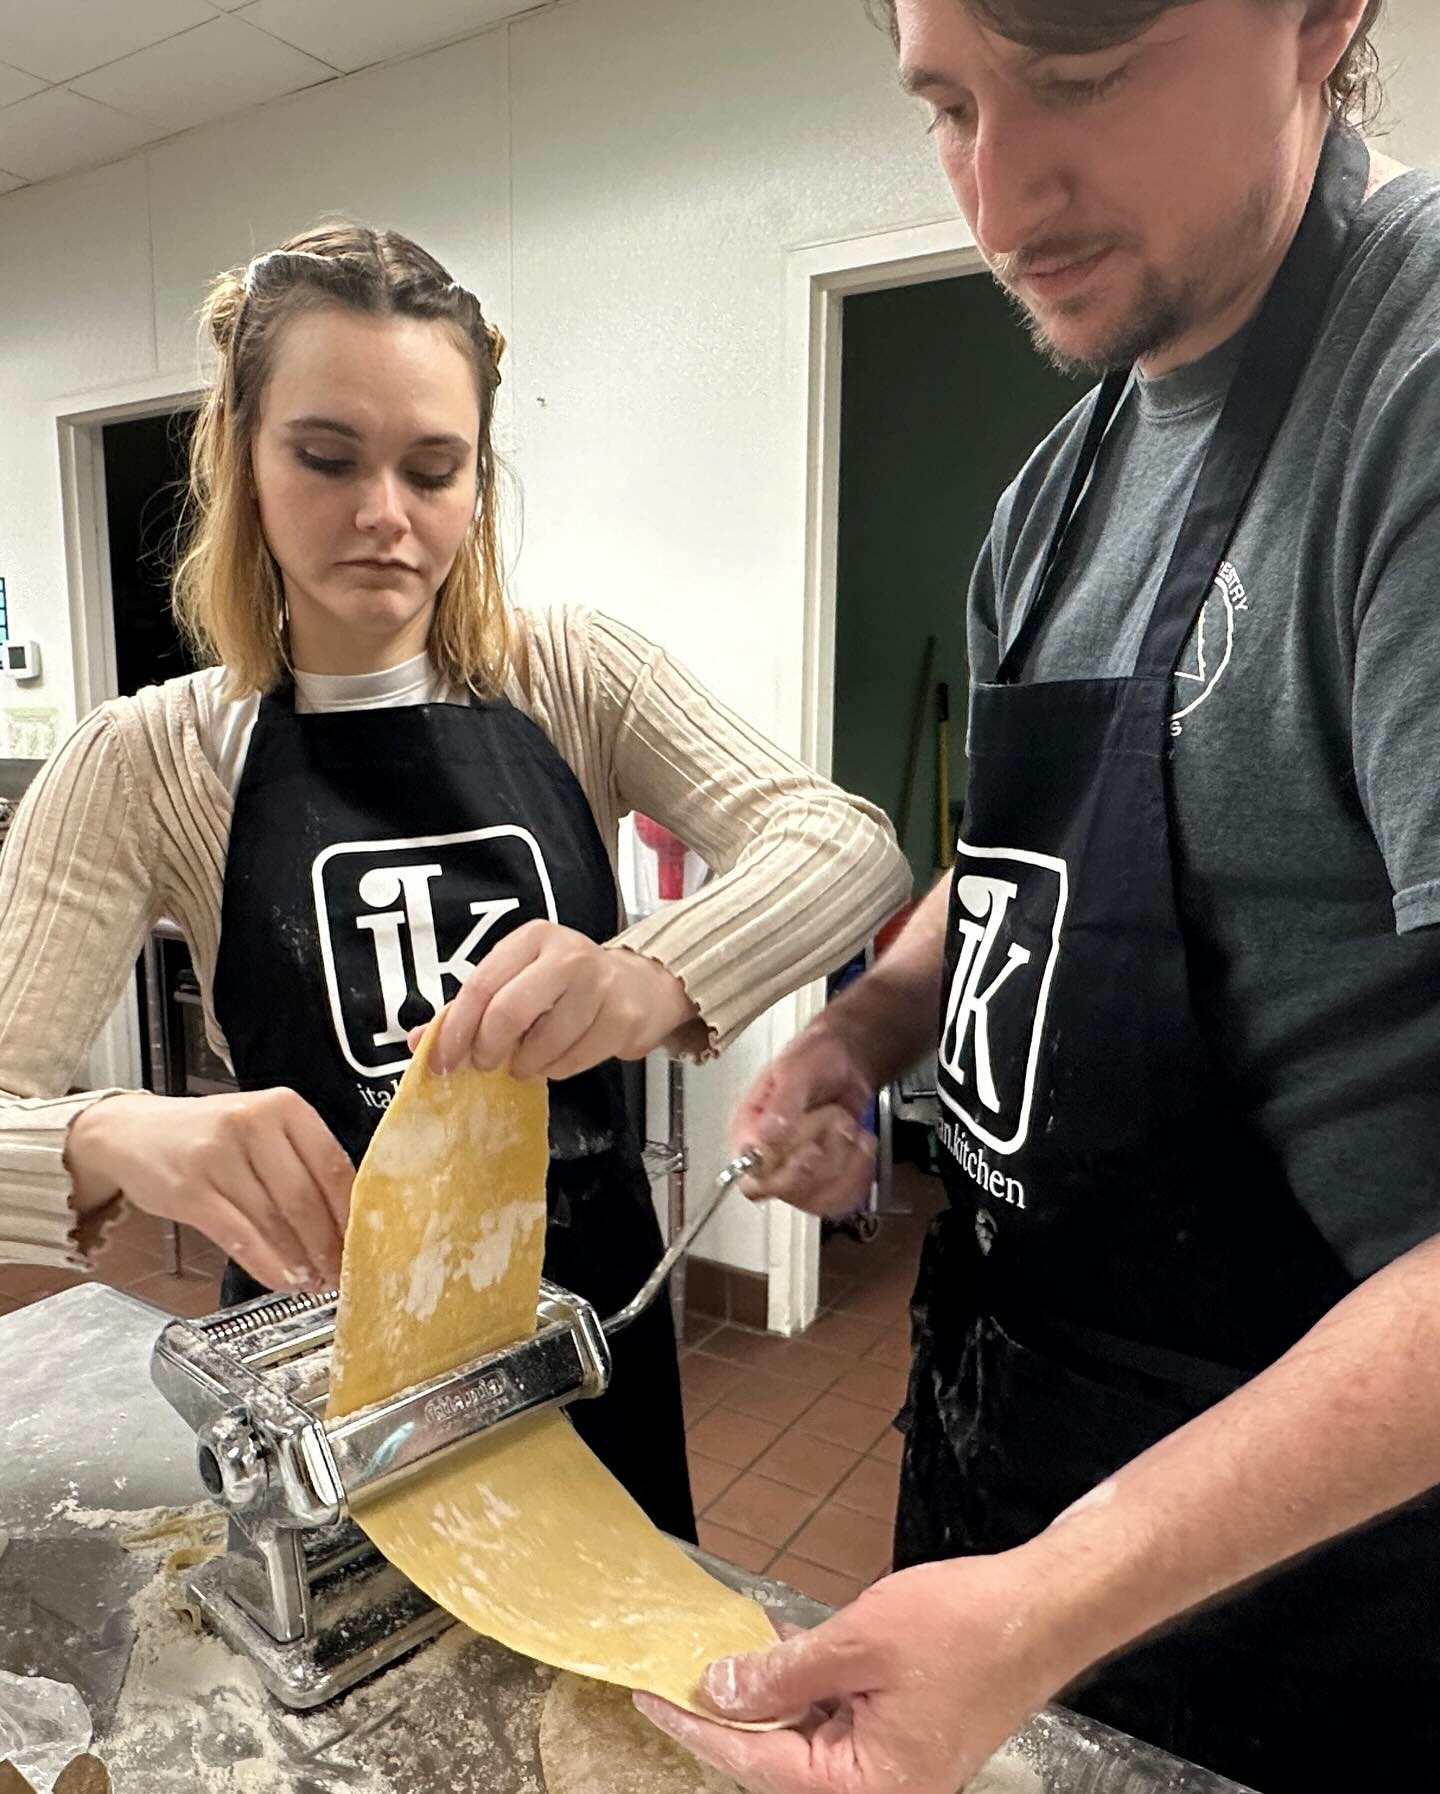 A man and a woman use a pasta maker during a cooking class at Italian Kitchen in Springfield, Missouri